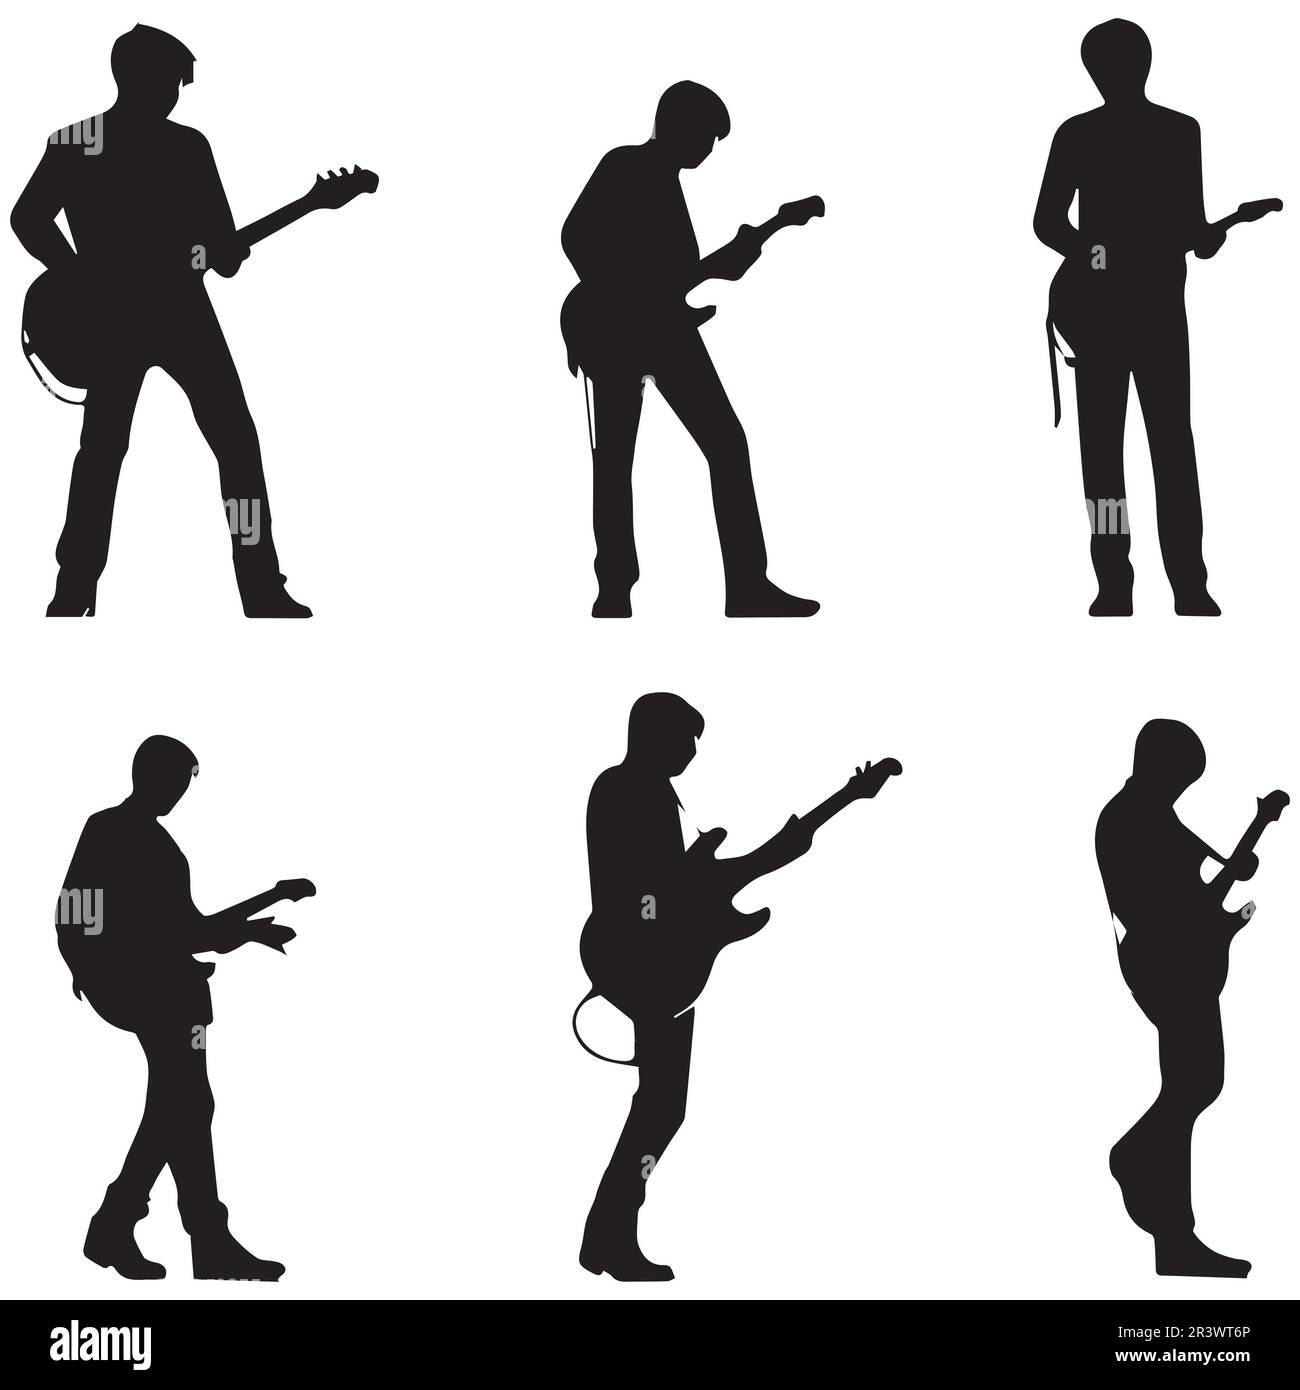 A man playing guitar silhouette vector illustration. Stock Vector